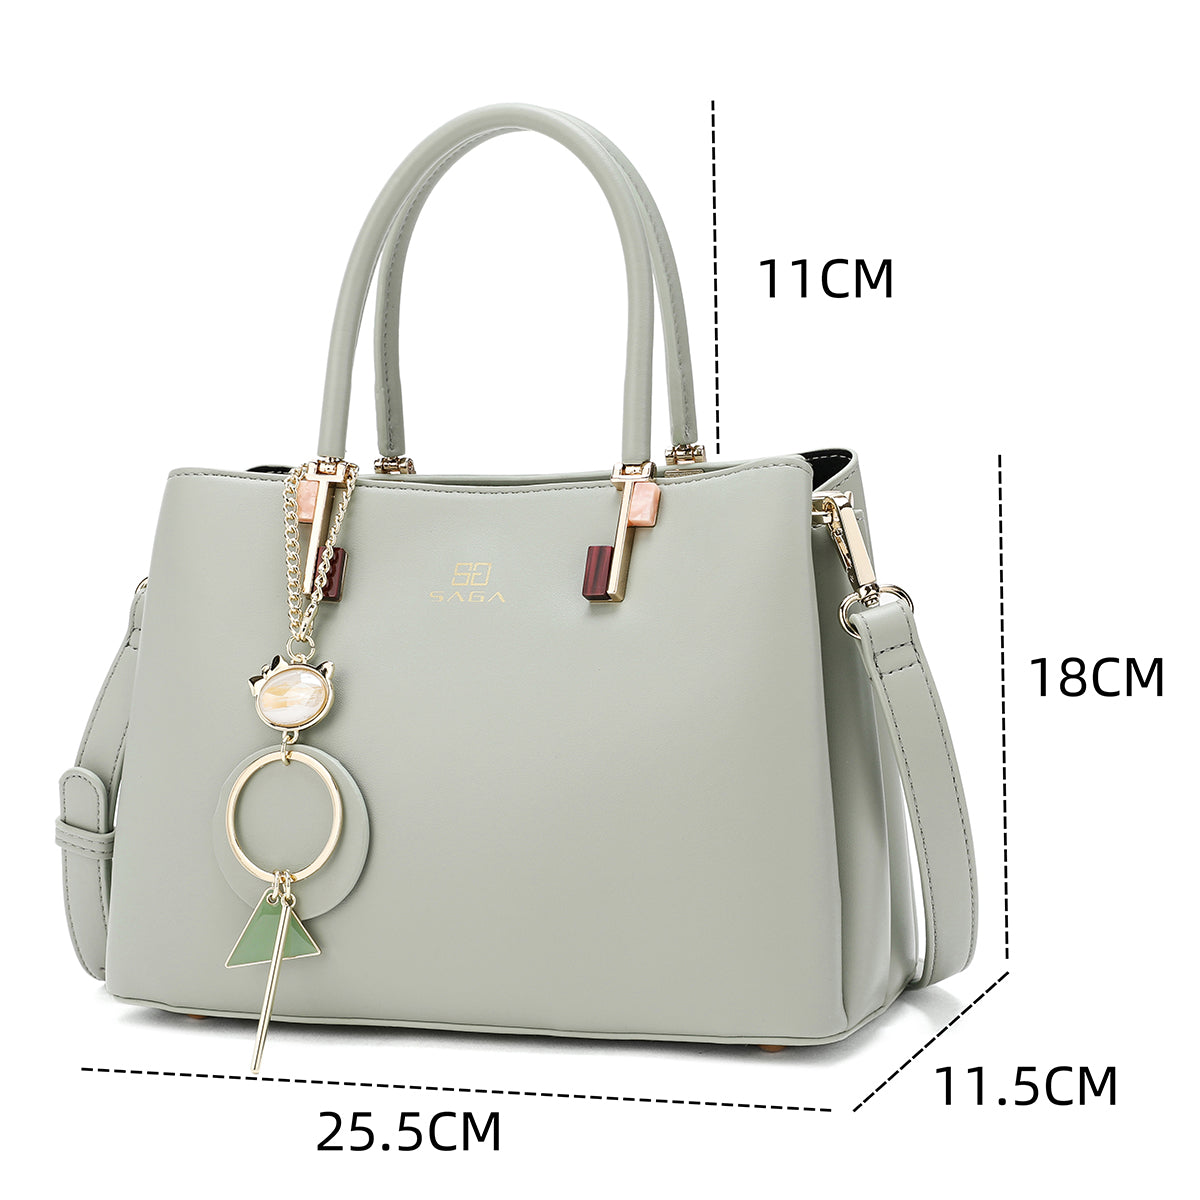 Plain bag with handle and shoulder strap, width 25.5 cm, available in three colors